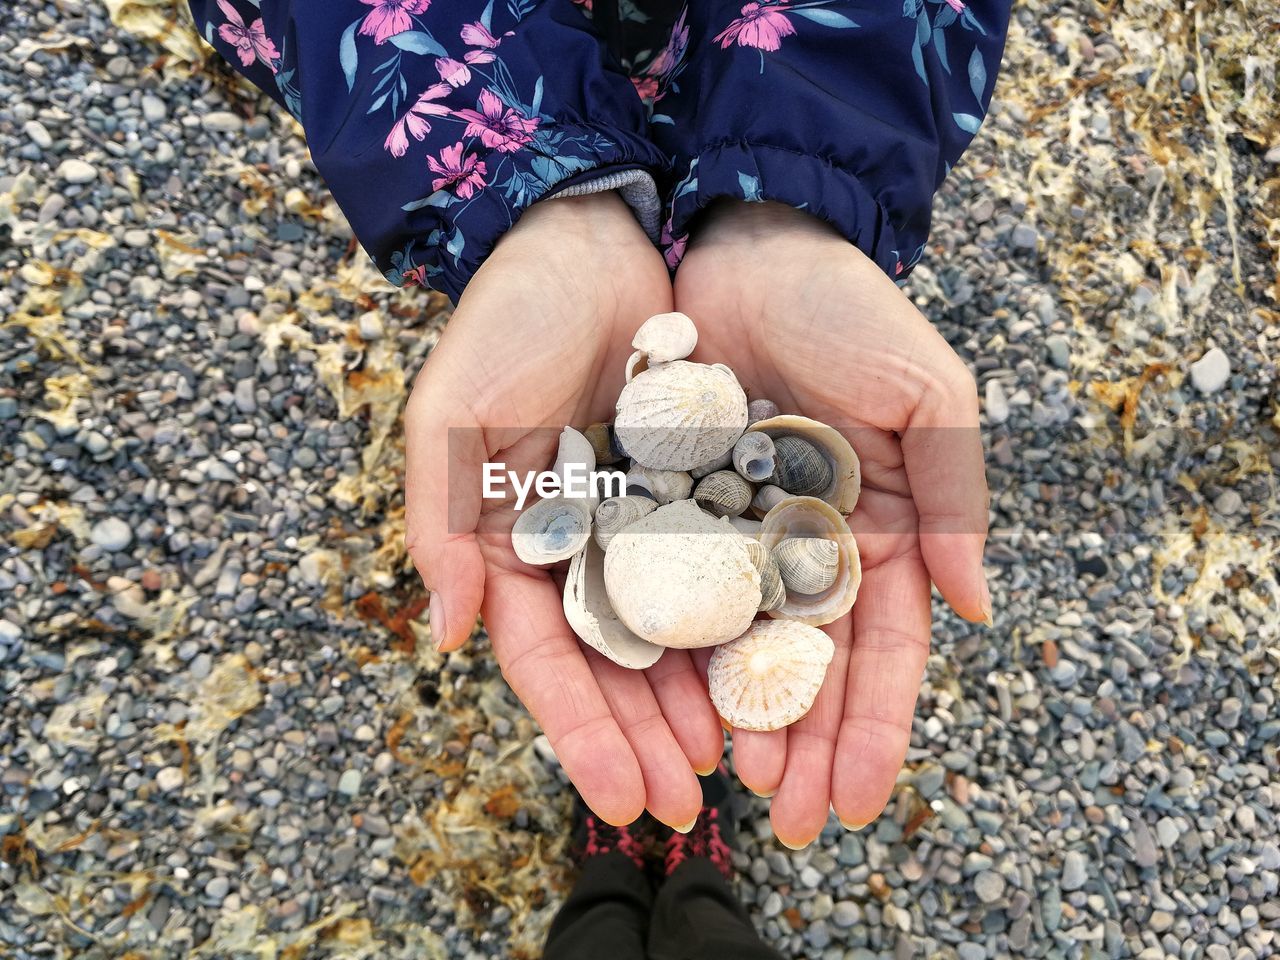 Cropped hands of woman holding seashells by person standing on pebble stones